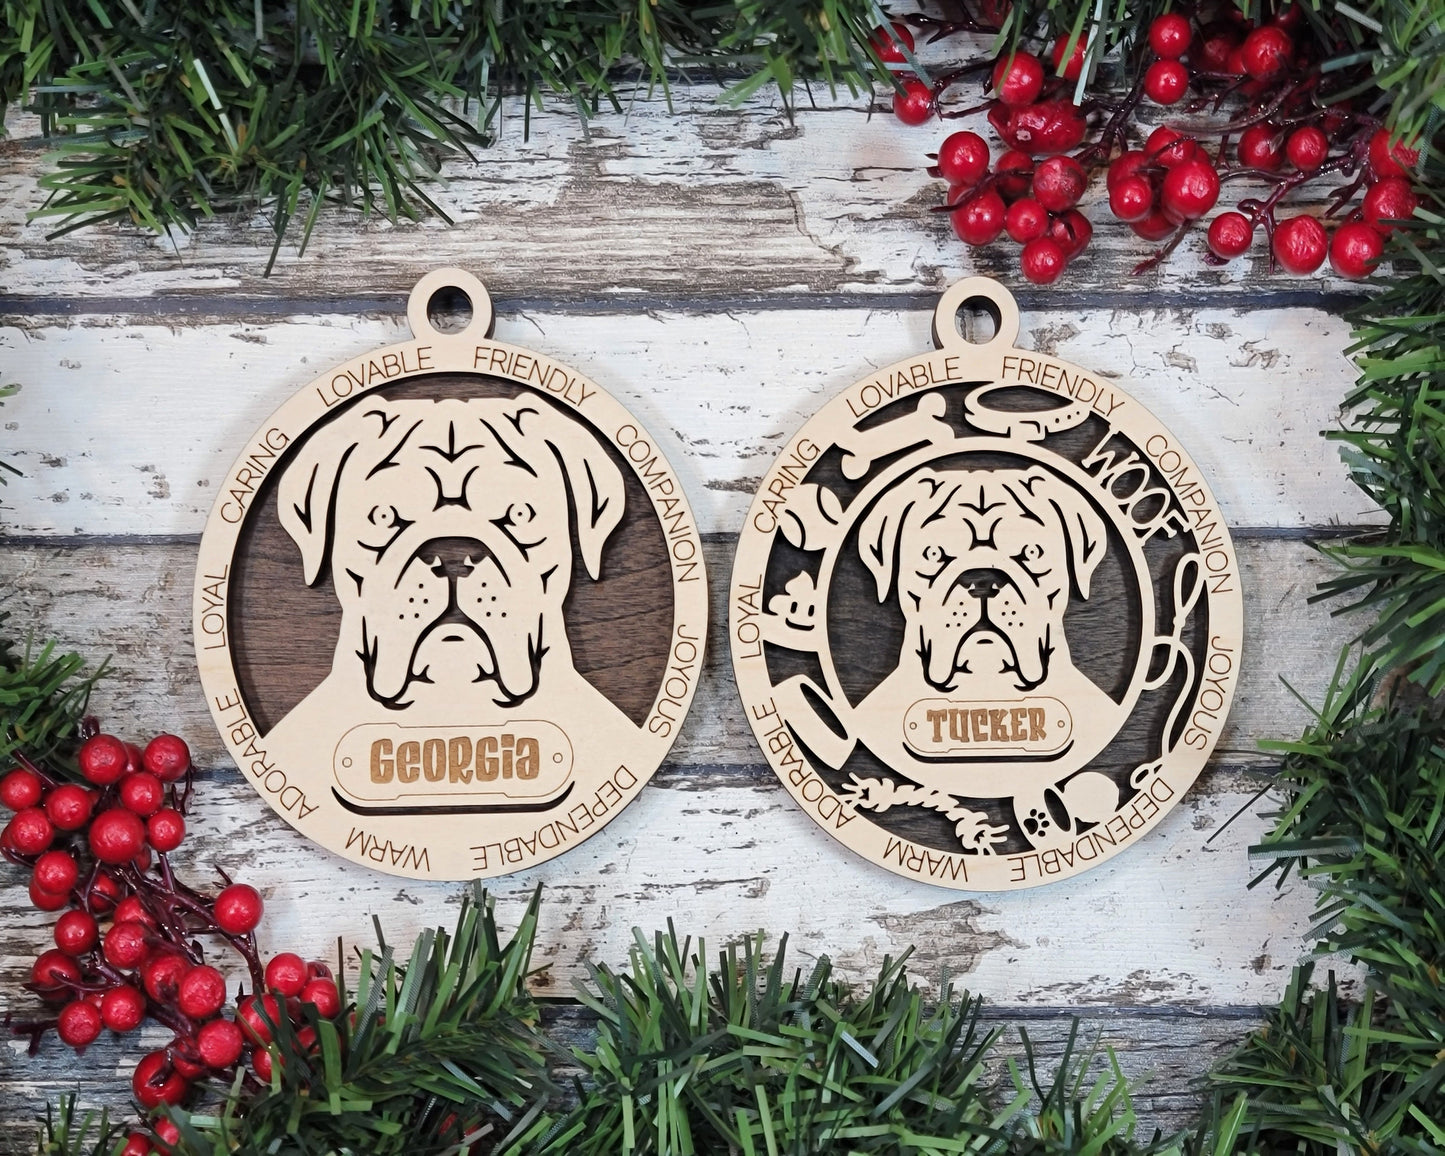 French Mastiff - Adorable Dog Ornaments - 2 Ornaments included - SVG, PDF, AI File Download - Sized for Glowforge